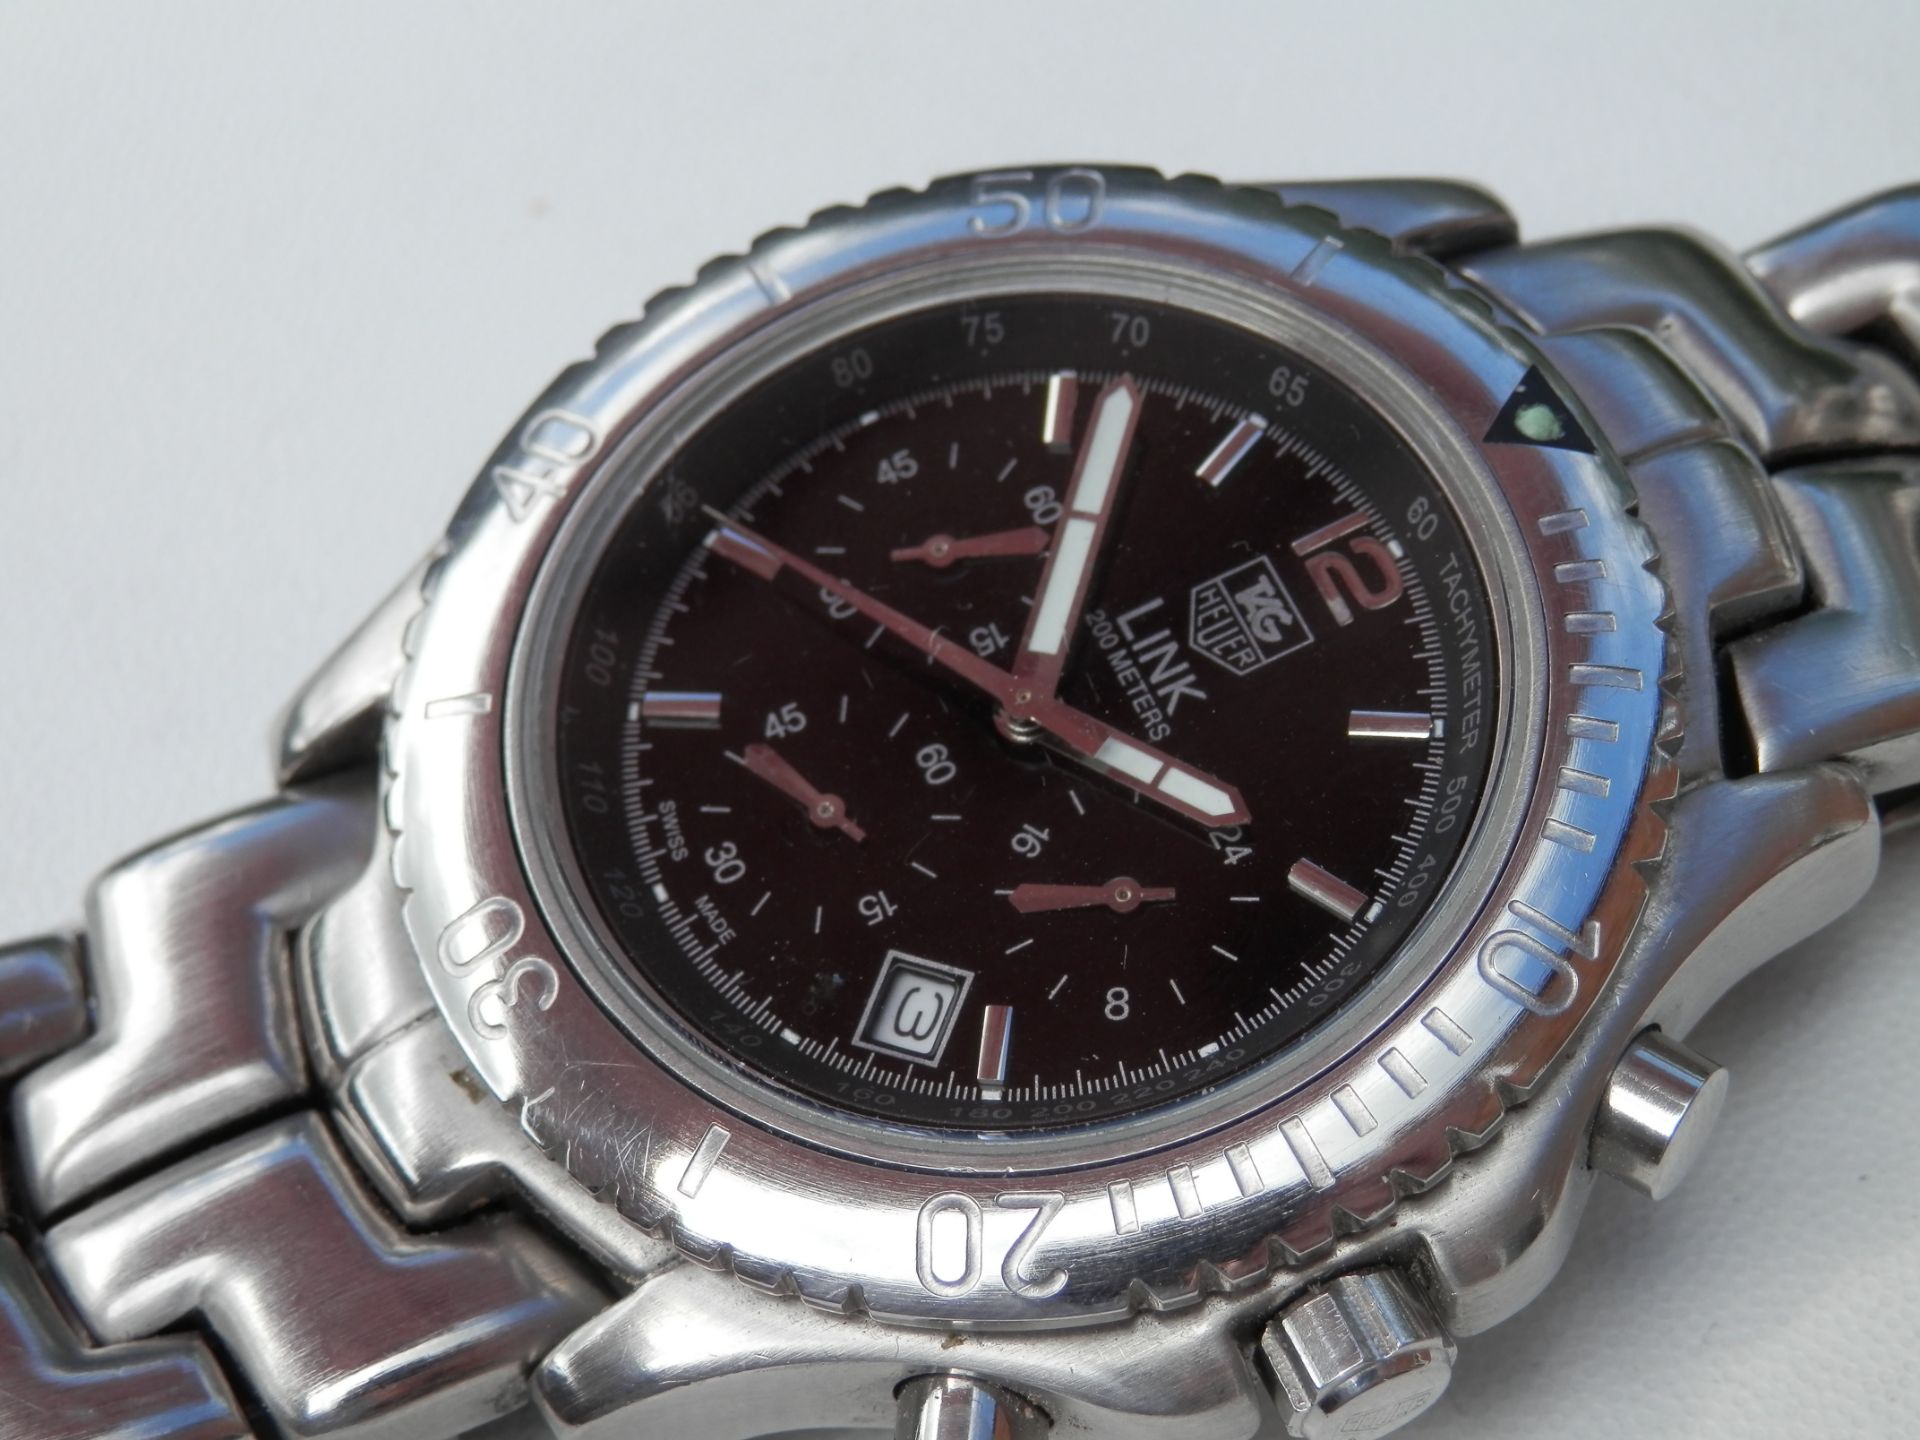 SUPERB TAG HEUER REPLICA FULL STAINLESS CHRONOGRAPH LARGE 45MM QUARTZ WATCH. 8" STRAP. BLACK DIAL. - Image 3 of 14